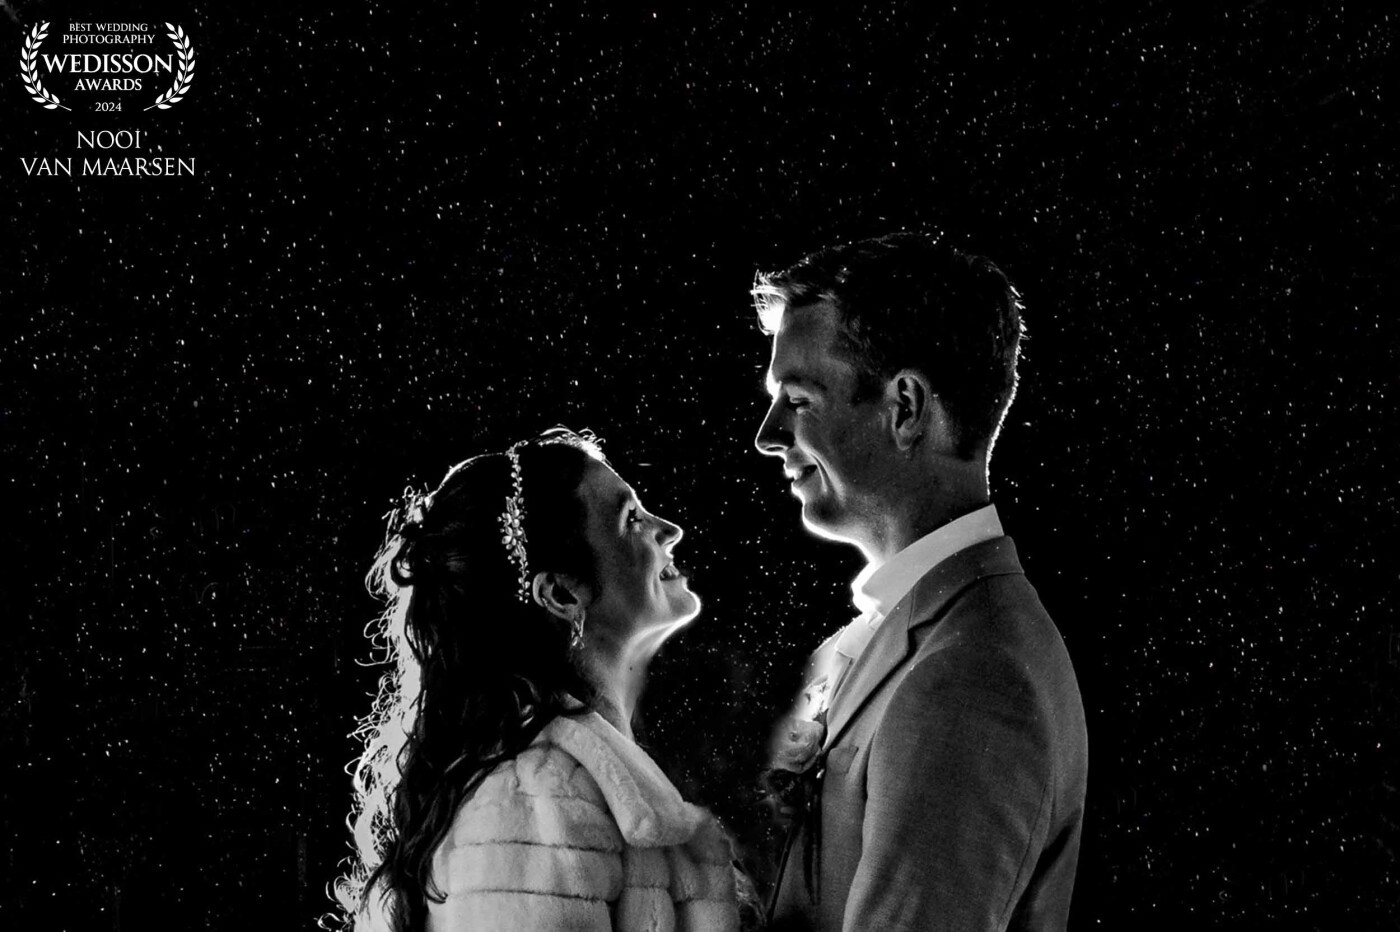 During the group photo’s at this winter wedding at kasteel woerden, the Netherlands it started raining heavily. Luckily this beautiful couple didn't care about the rain. And I was excited too. Rain is a great addition to a photo. So if you ever have rain on your wedding day? Don't worry a good photographer always knows what to do with it and will get excited seeing it.